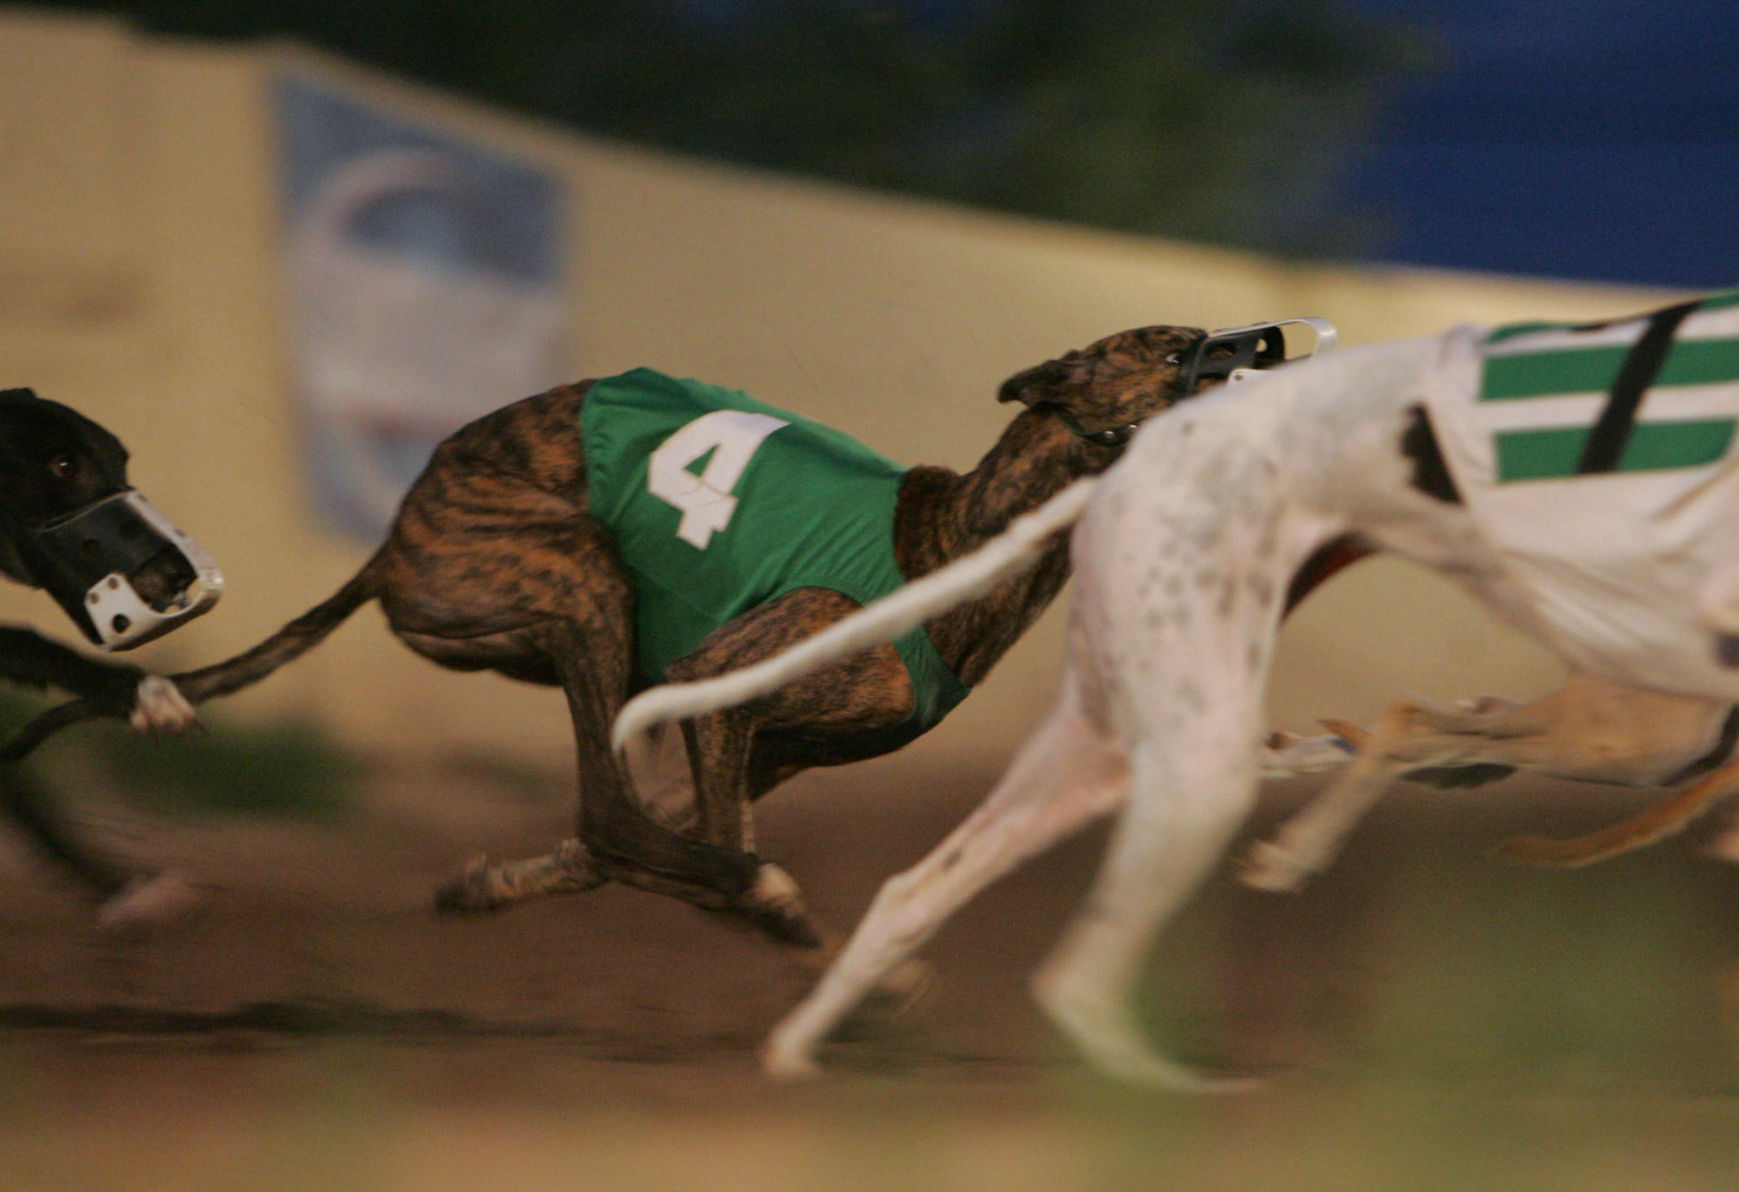 category one greyhound races